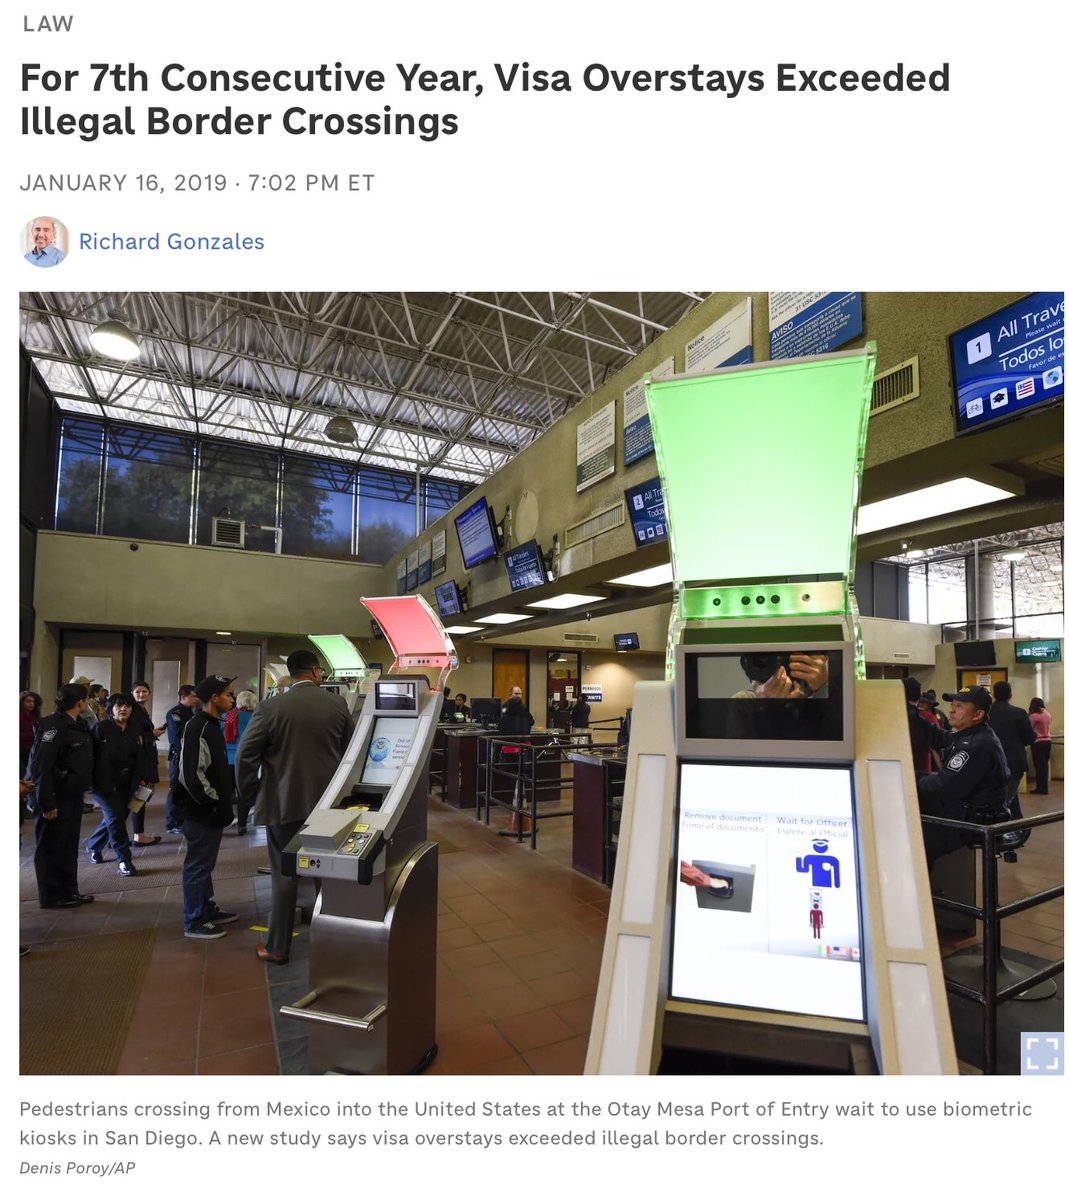 @Rensontwitts @dartagnank @currermell @Ddaj13 @ChrisMurphyCT That’s impossible though. You are never, ever going to stop every single attempted illegal crossing. That’s an admirable goal, but one no country on earth can realistically achieve, especially since the majority of illegal immigrants enter legally and just overstay their visa.